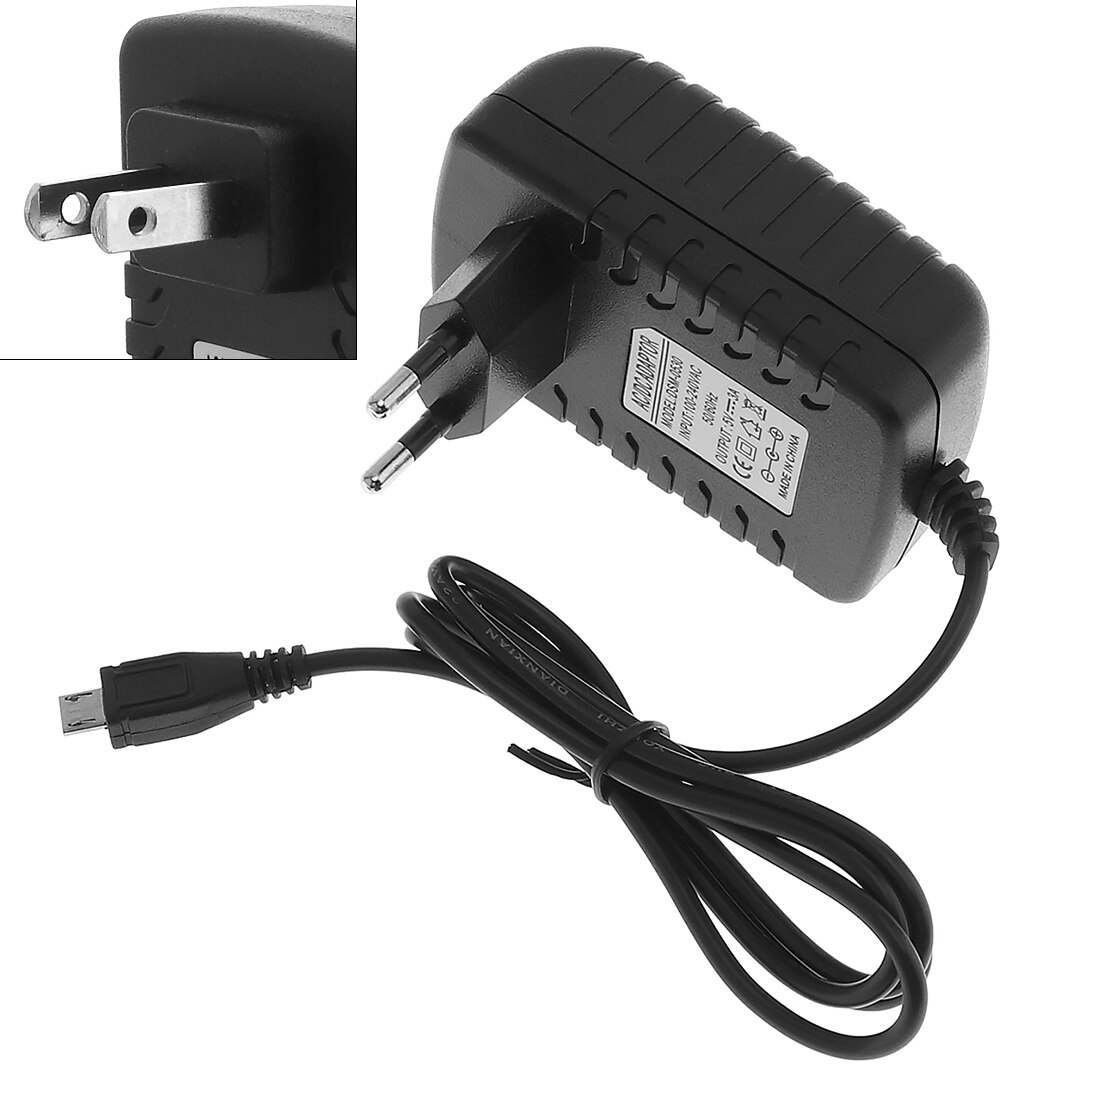 5V 3A Power Adapter Micro Usb Ac/Dc Adapter Eu/Us Plug Voor Raspberry Pi 3 Nul model B B + 5V 3A Voeding Lader Sp 5V 2.5A